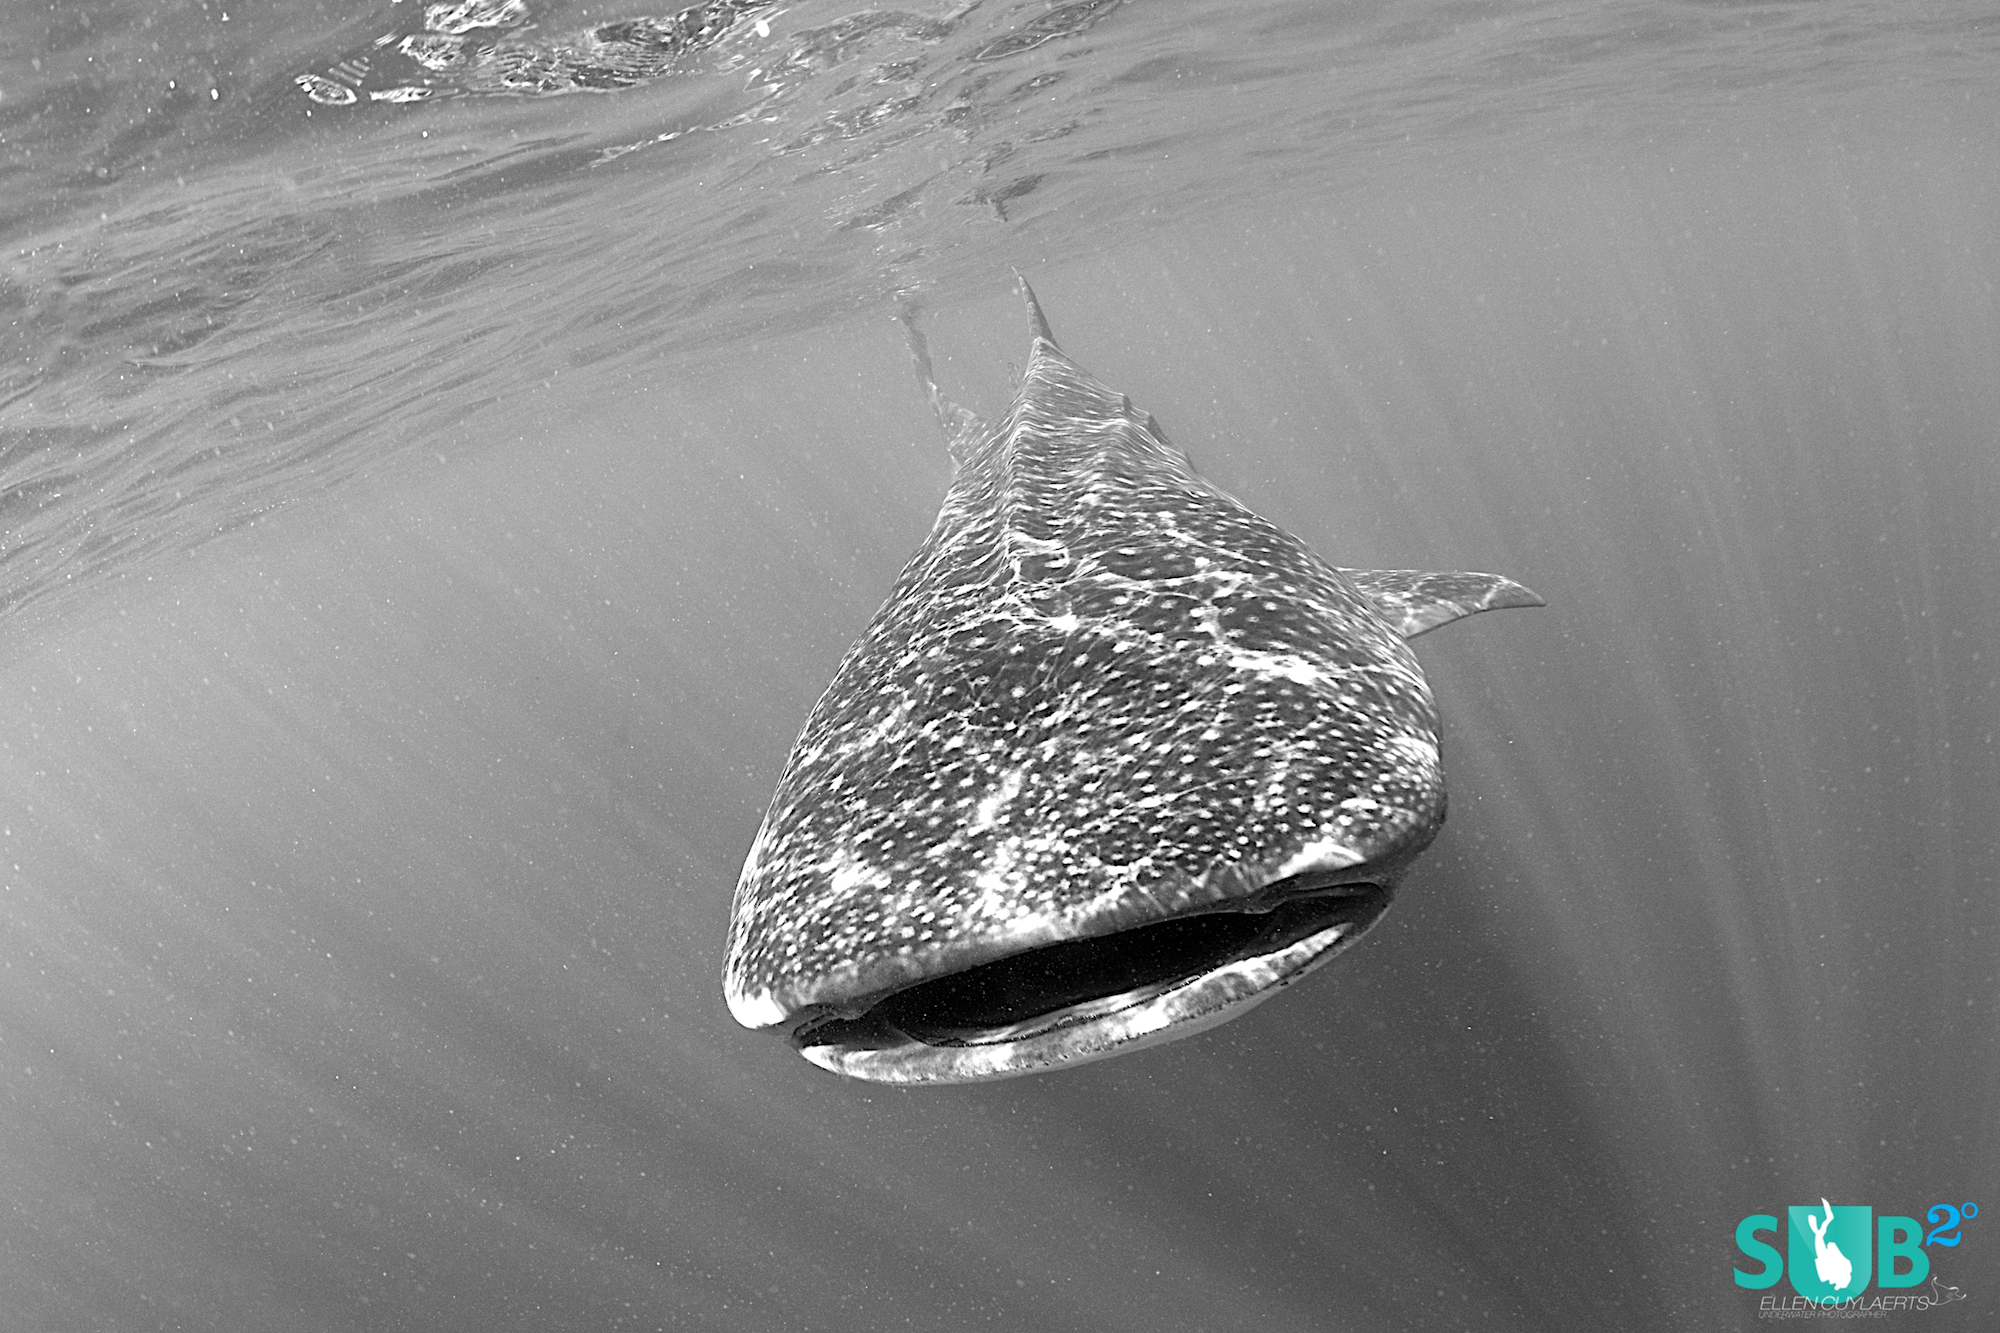 Getting out to the aggregation on rough water in small boats is not very comfortable, but when the sun comes out and the whale sharks appear, it's all worthwhile!